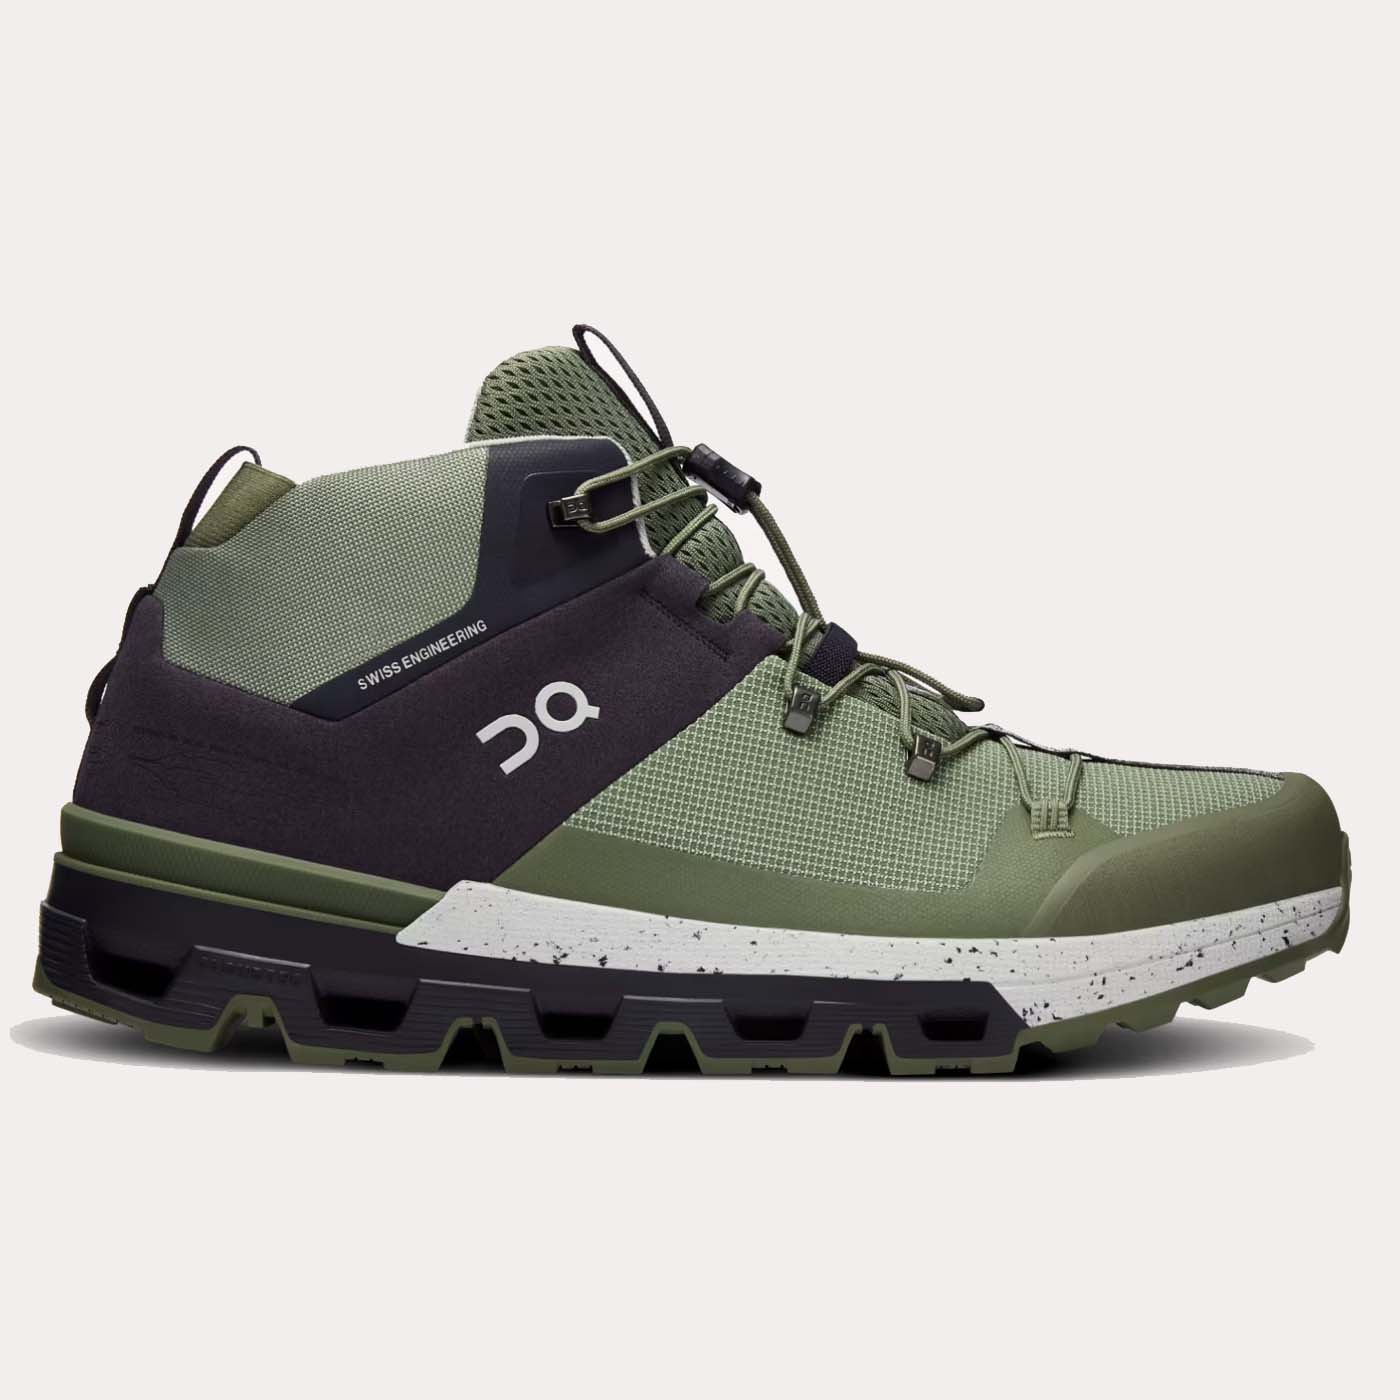 Cloudtrax Hiking Shoes for men in green and black